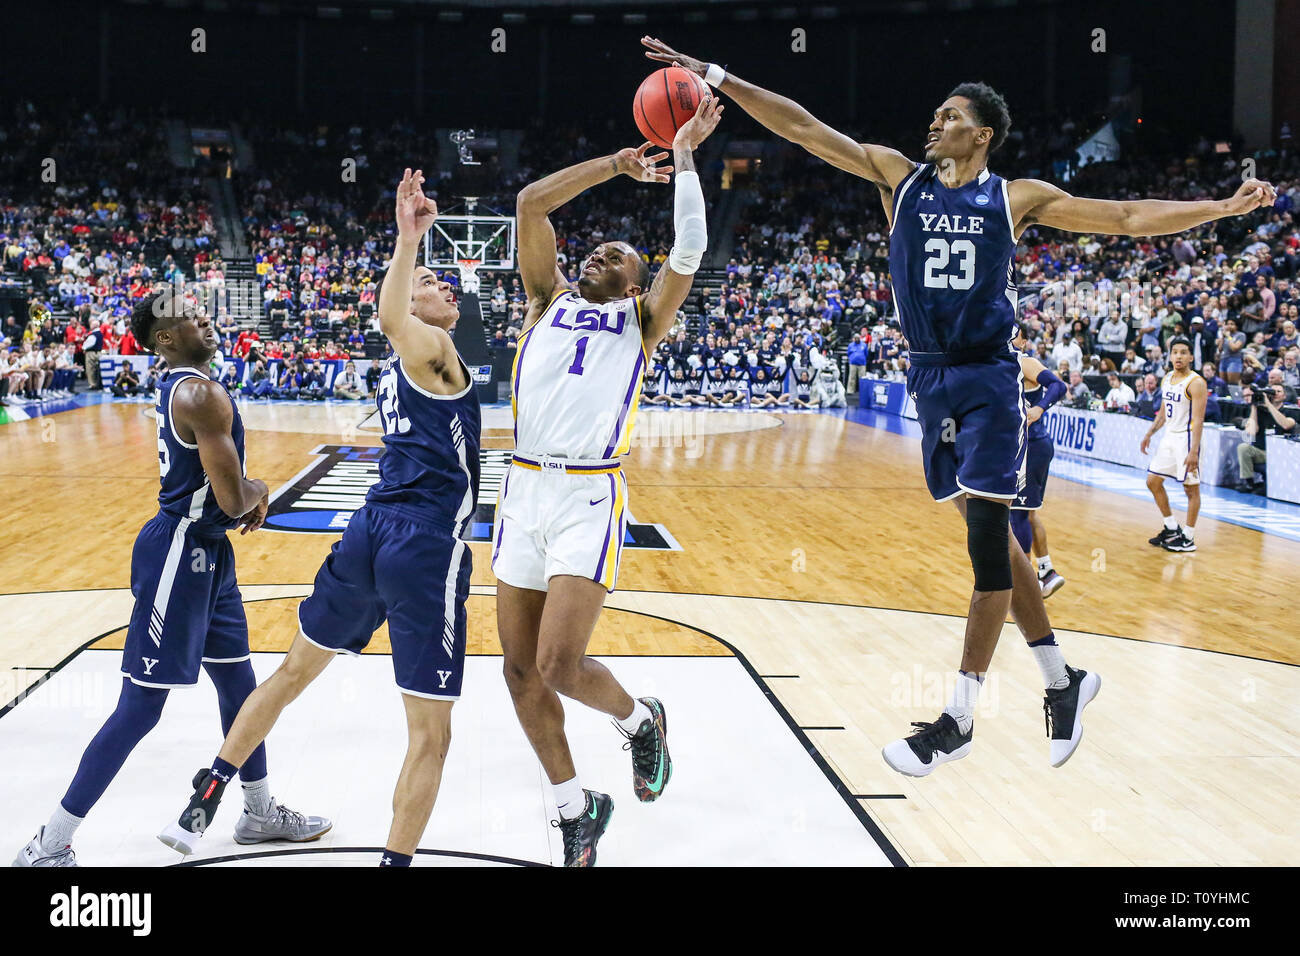 LSU Tigers guard Javonte Smart (1) has his shot blocked by Yale Bulldogs  forward Jordan Bruner (23) during the second half of an NCAA college  tournament basketball game against the Yale Bulldogs